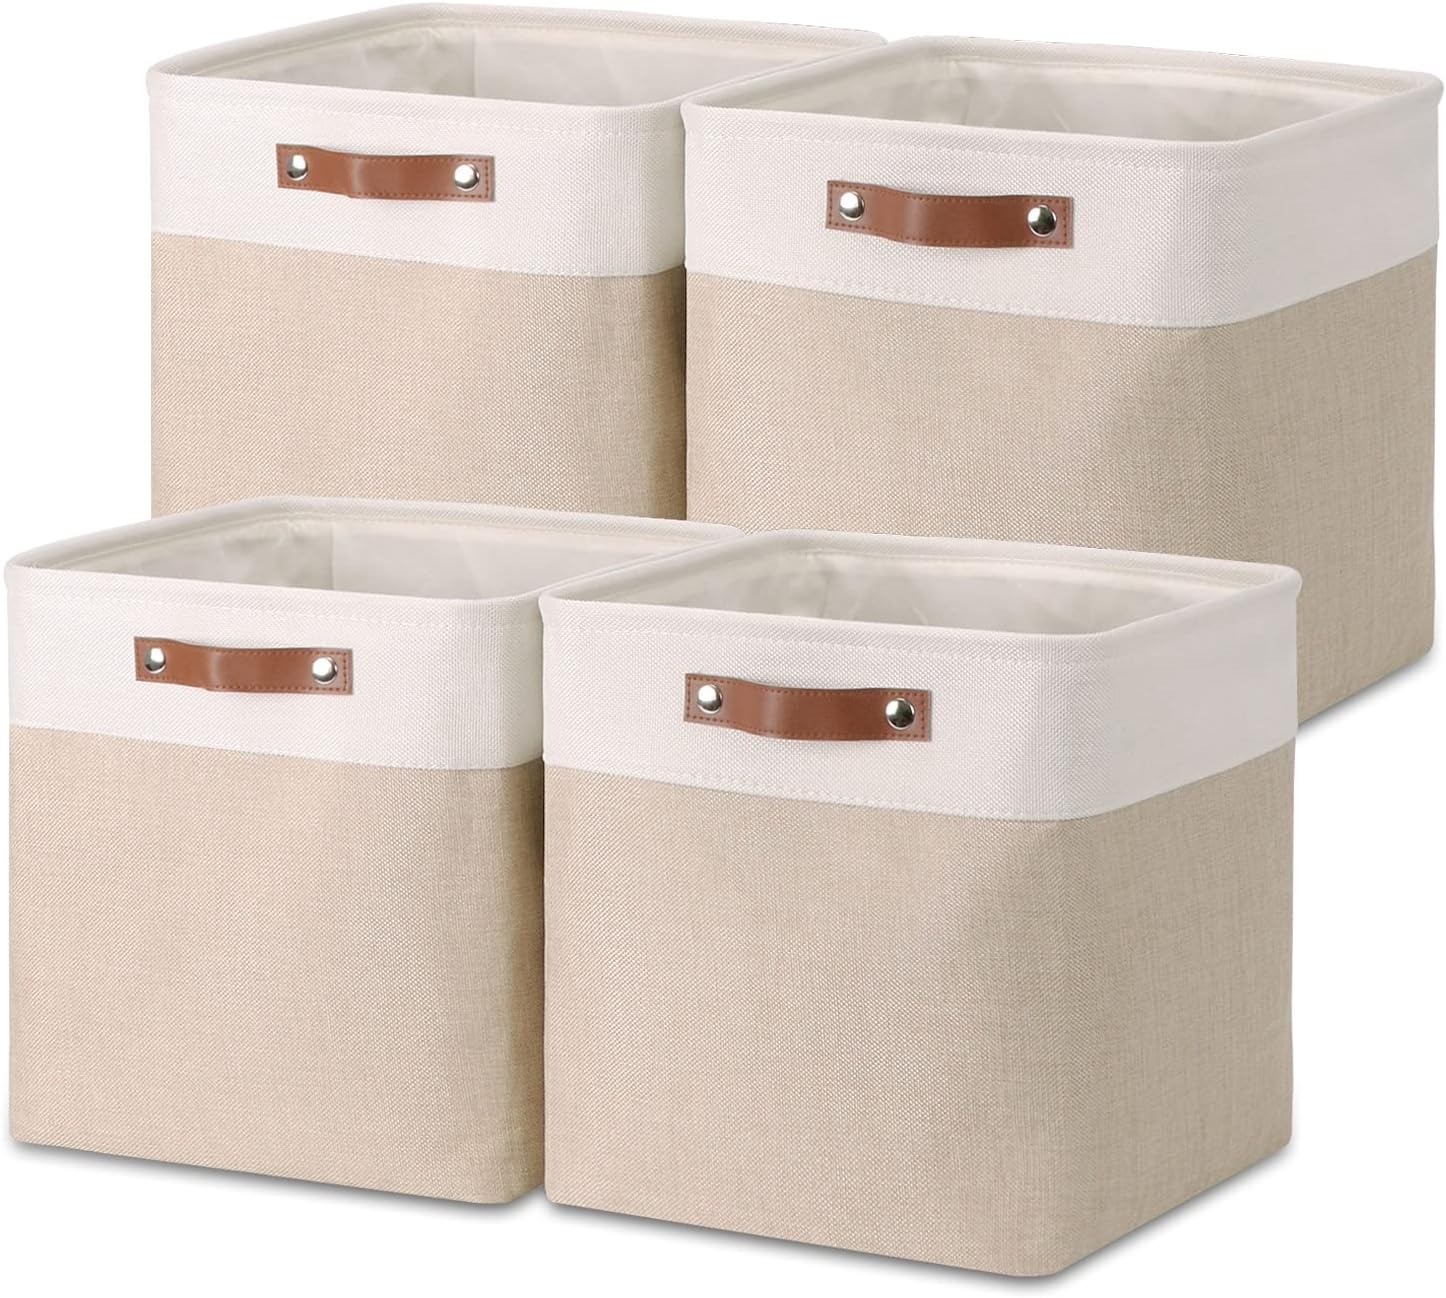 Temary Cube Storage Bins 13x13 Fabric Storage Cubes Baskets Set Of 4 Cloth Baskets for Shelf, Large Basket Gift Empty Toy Baskets for Kids, Dog Toy Baskets Cube Basket for Storage (White&Khaki)